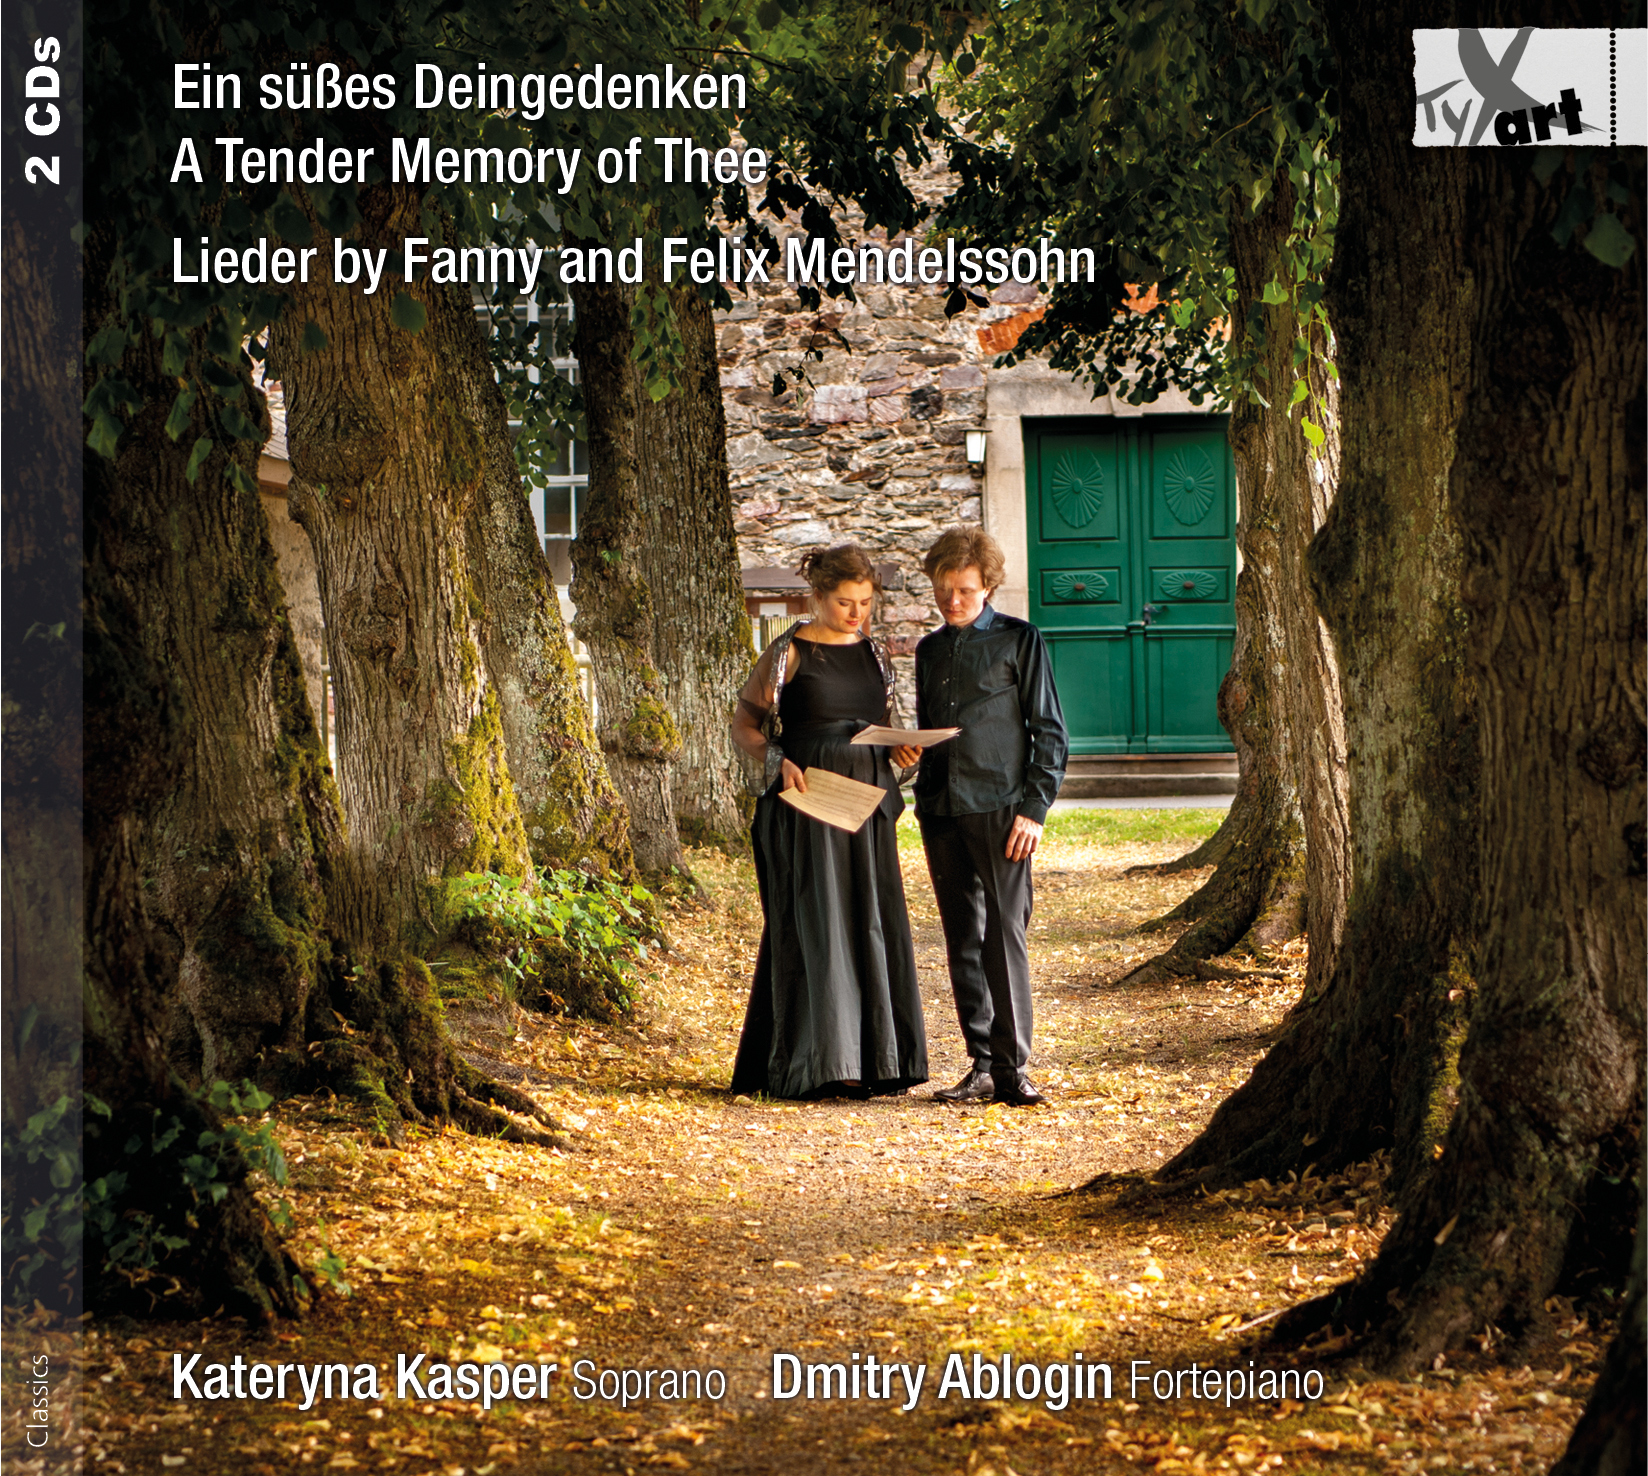 A Tender Memory of Thee - Lieder by Fanny and Felix Mendelssohn - Kateryna Kasper and Dmitry Ablogin